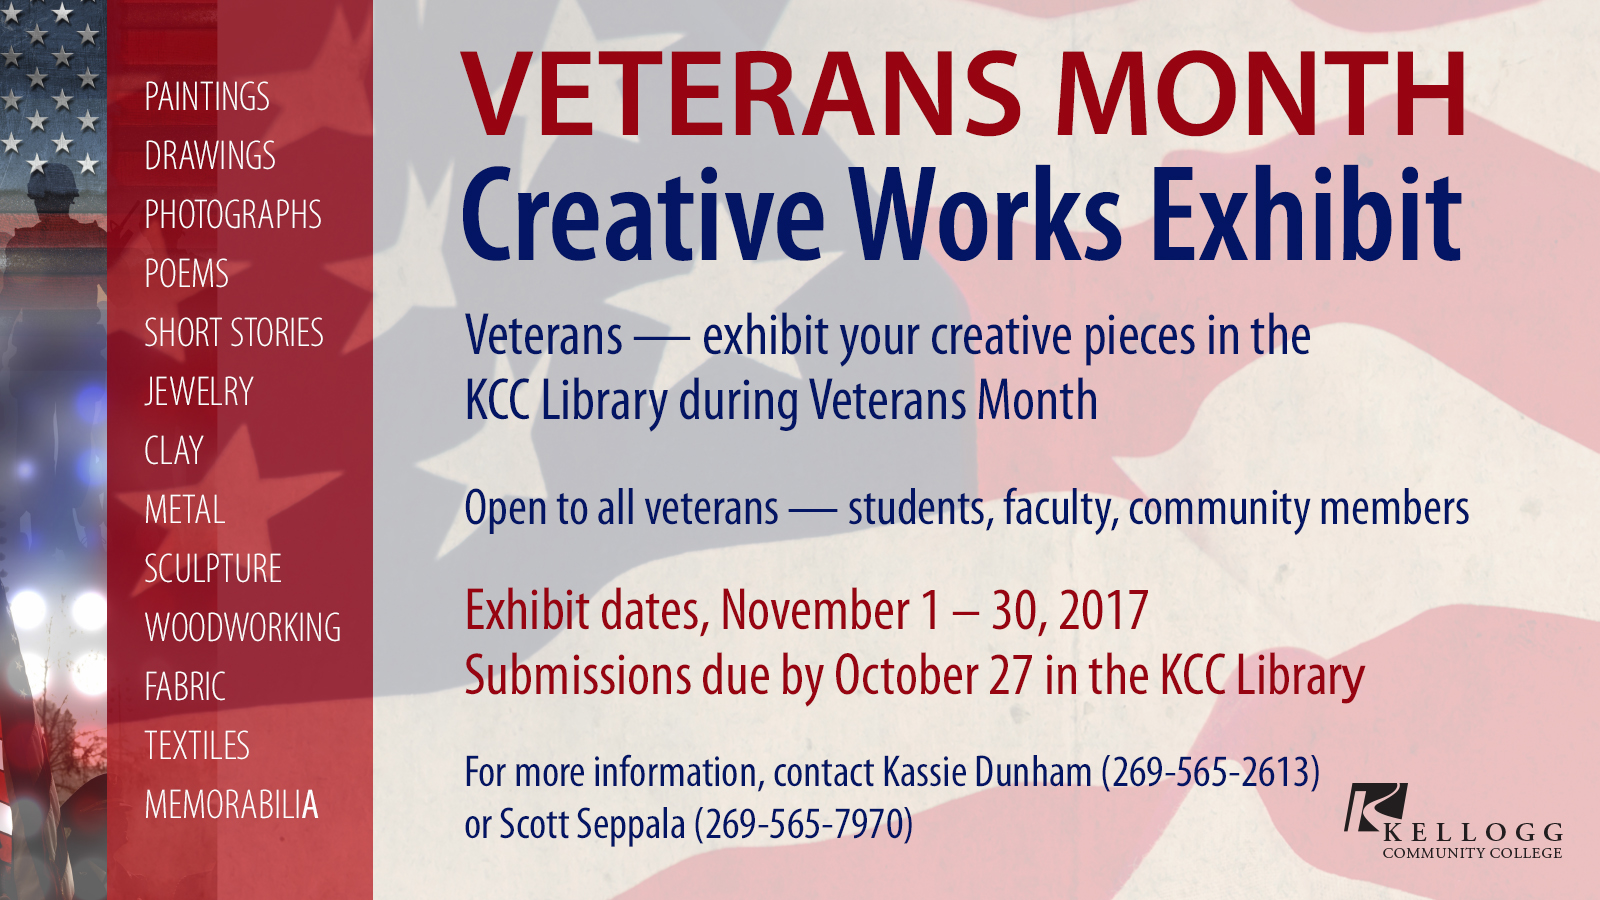 A text slide calling for submissions from veteran artists for works for KCC's Veterans Month Creative Works Exhibit.